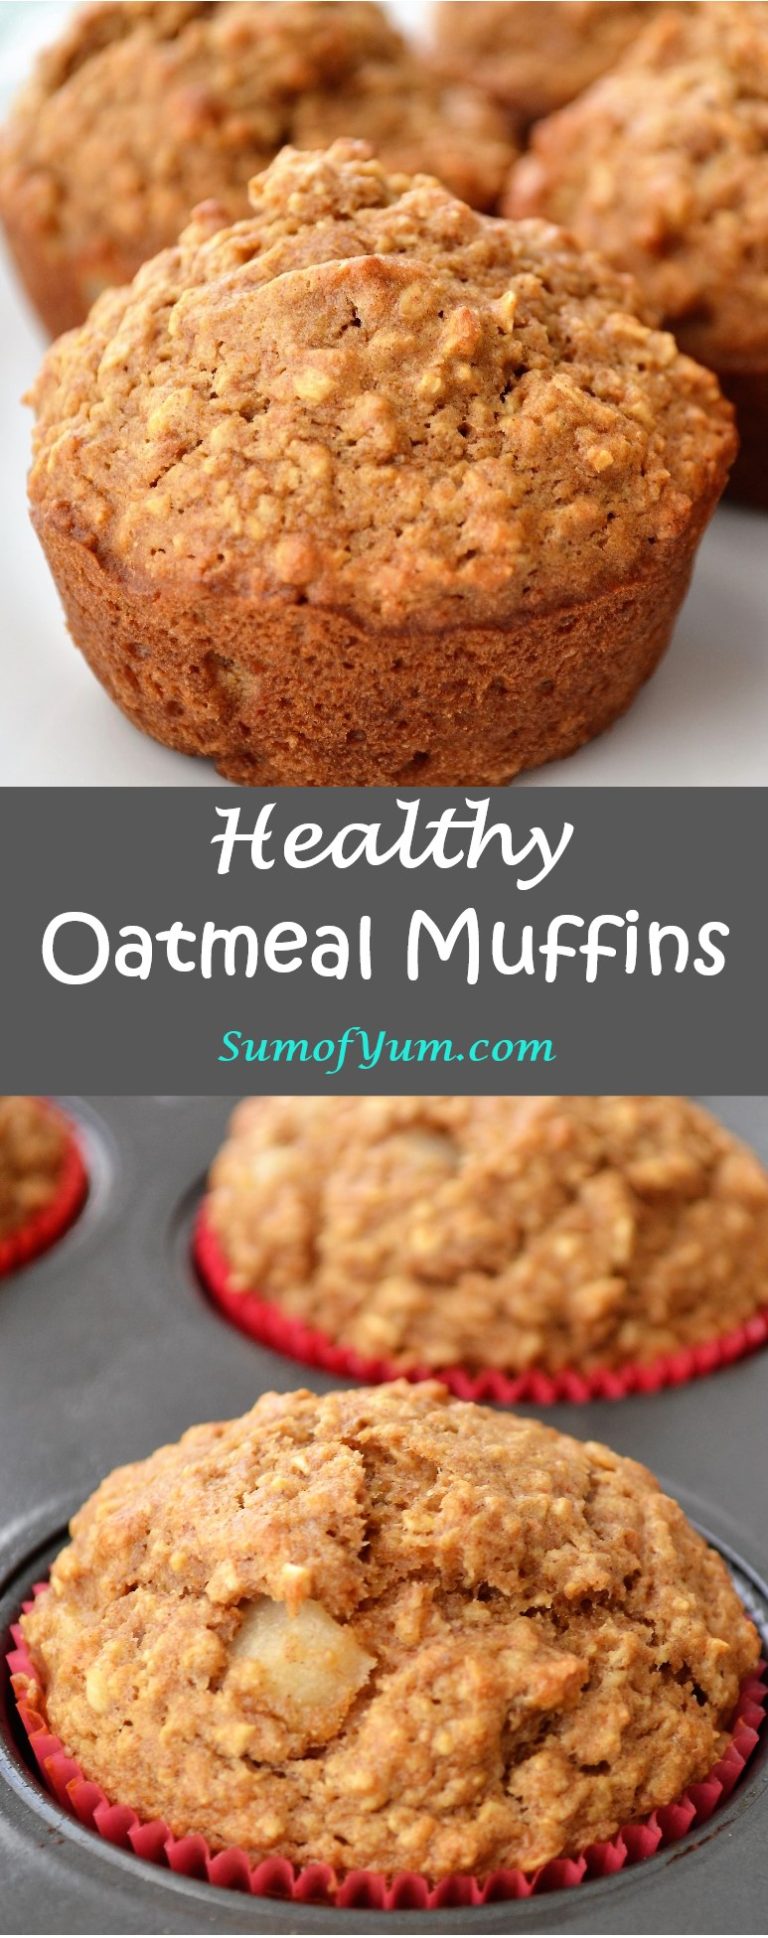 Healthy Oatmeal Muffins - Sum of Yum